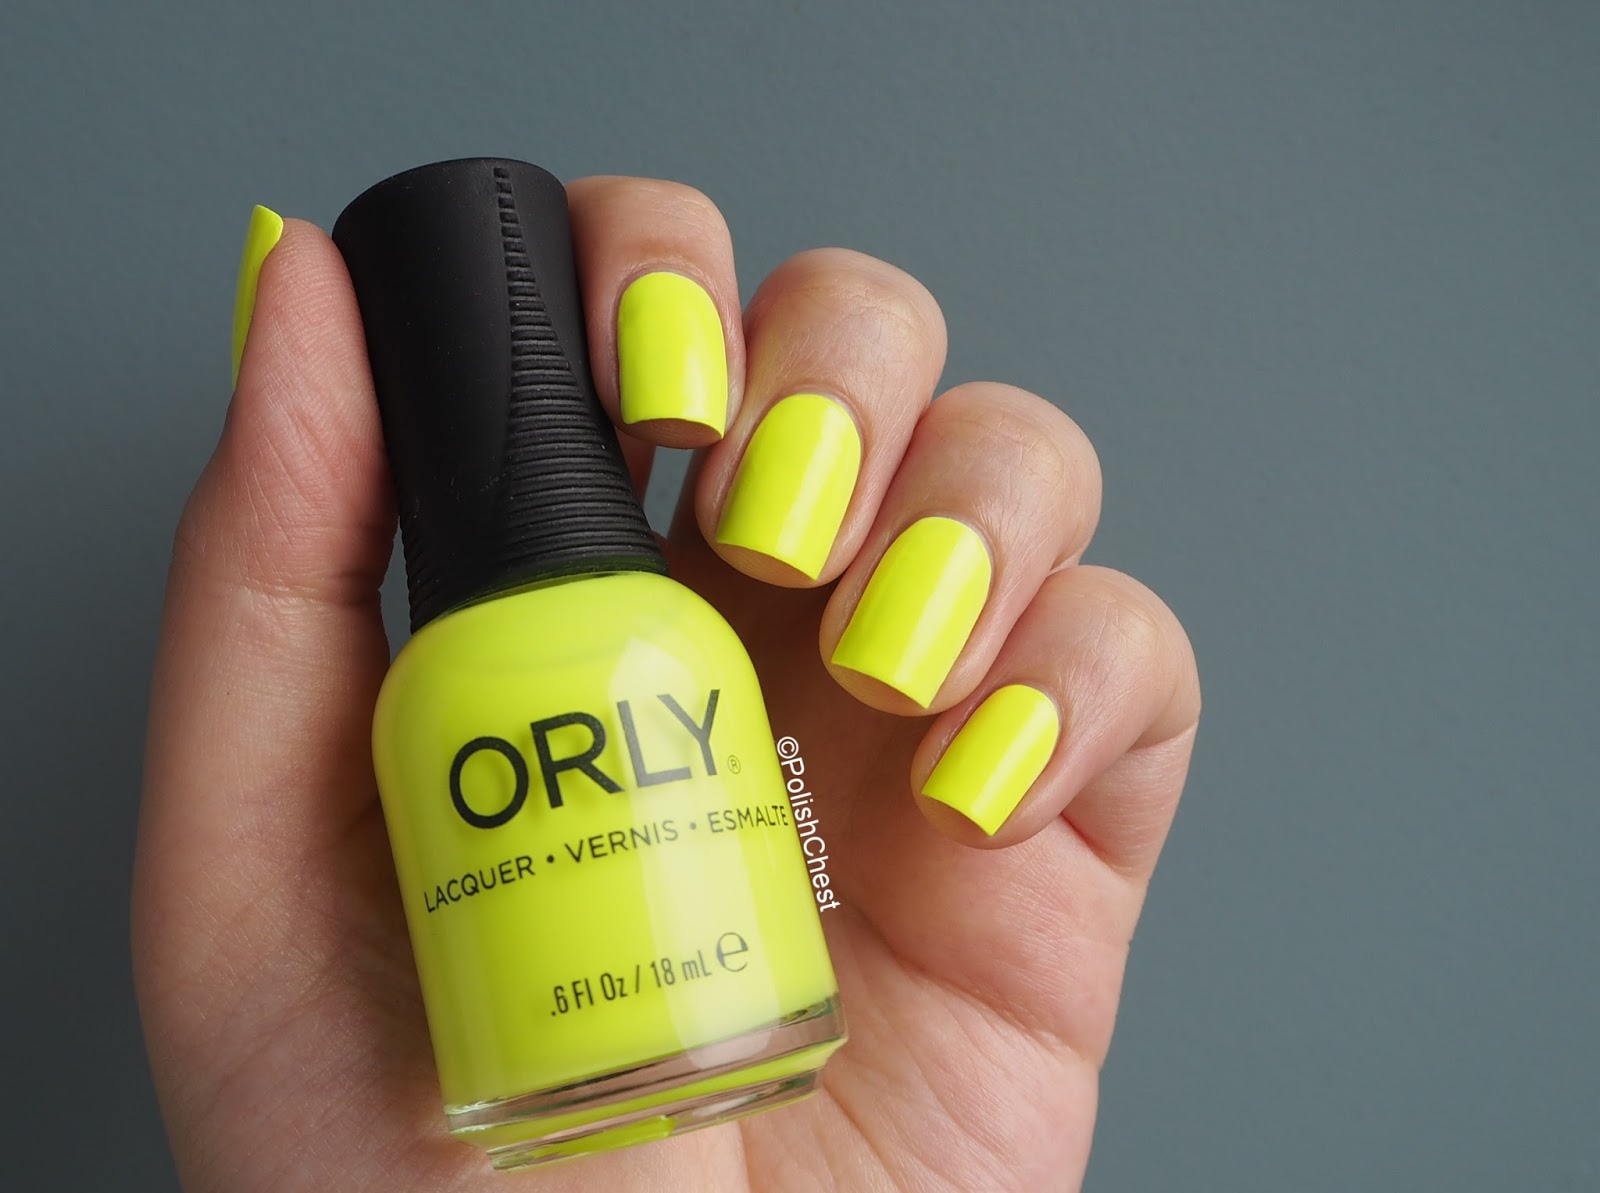 10. Orly Nail Lacquer in "Glowstick" - wide 3